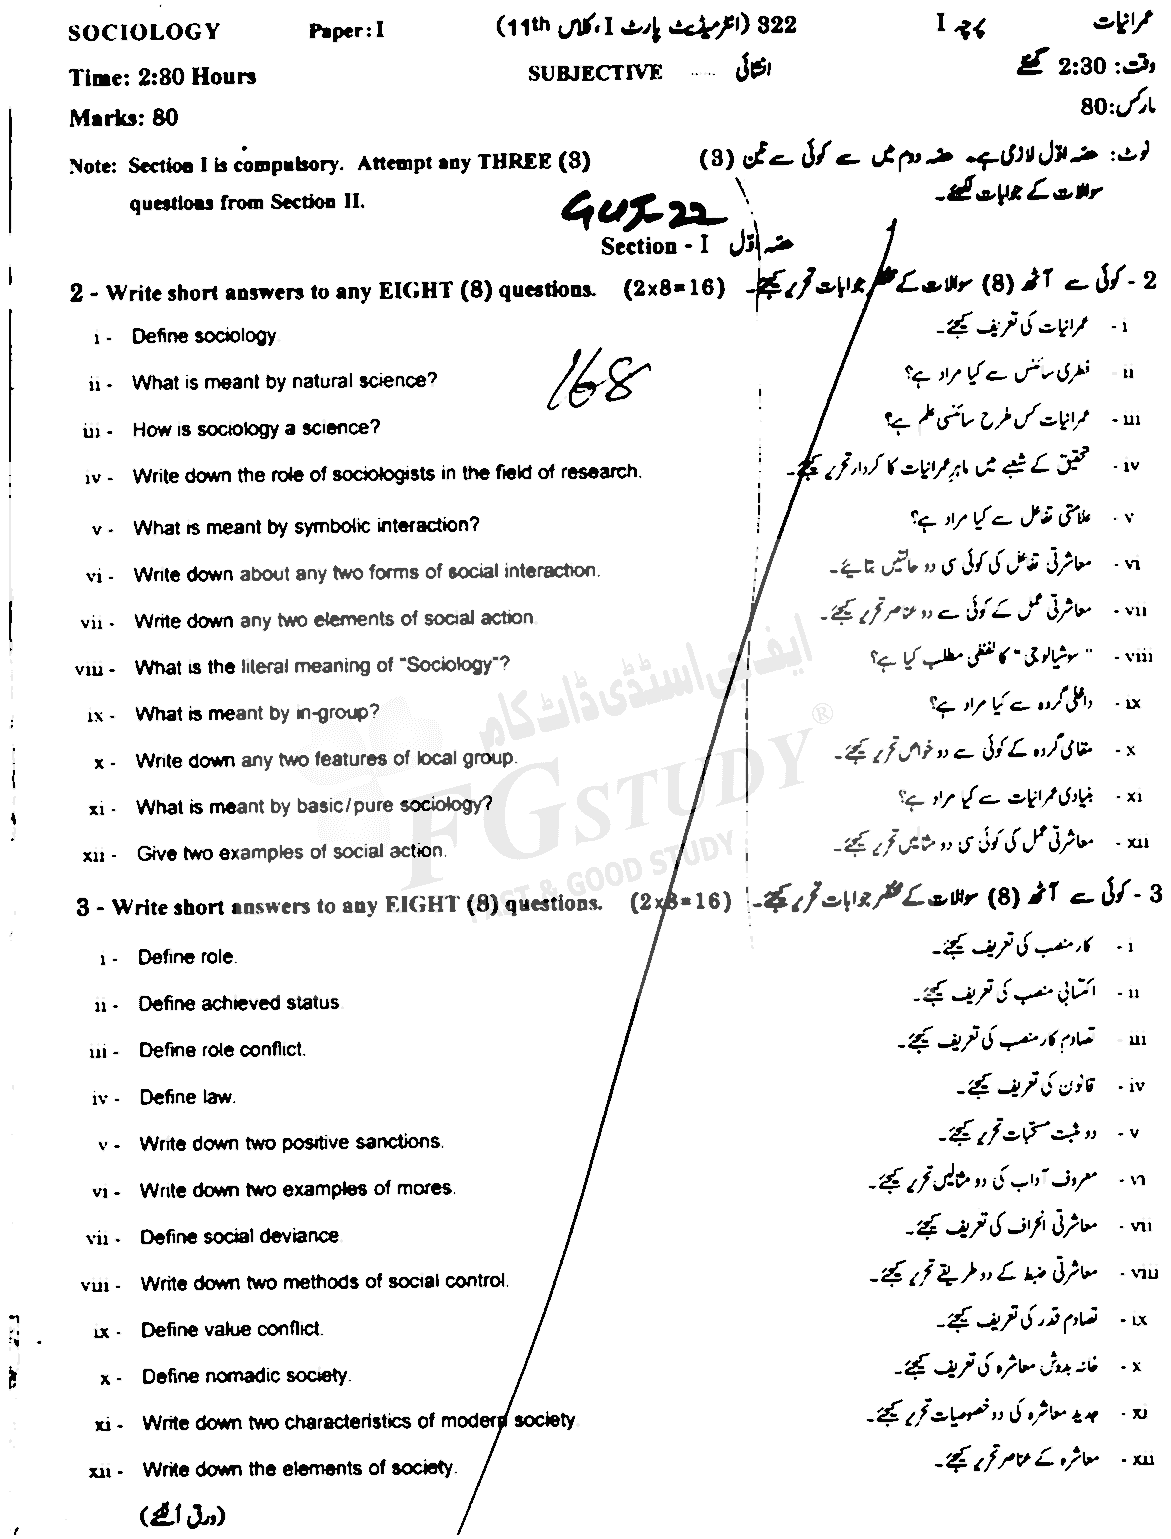 11th Class Sociology Past Paper 2022 Gujranwala Board Subjective